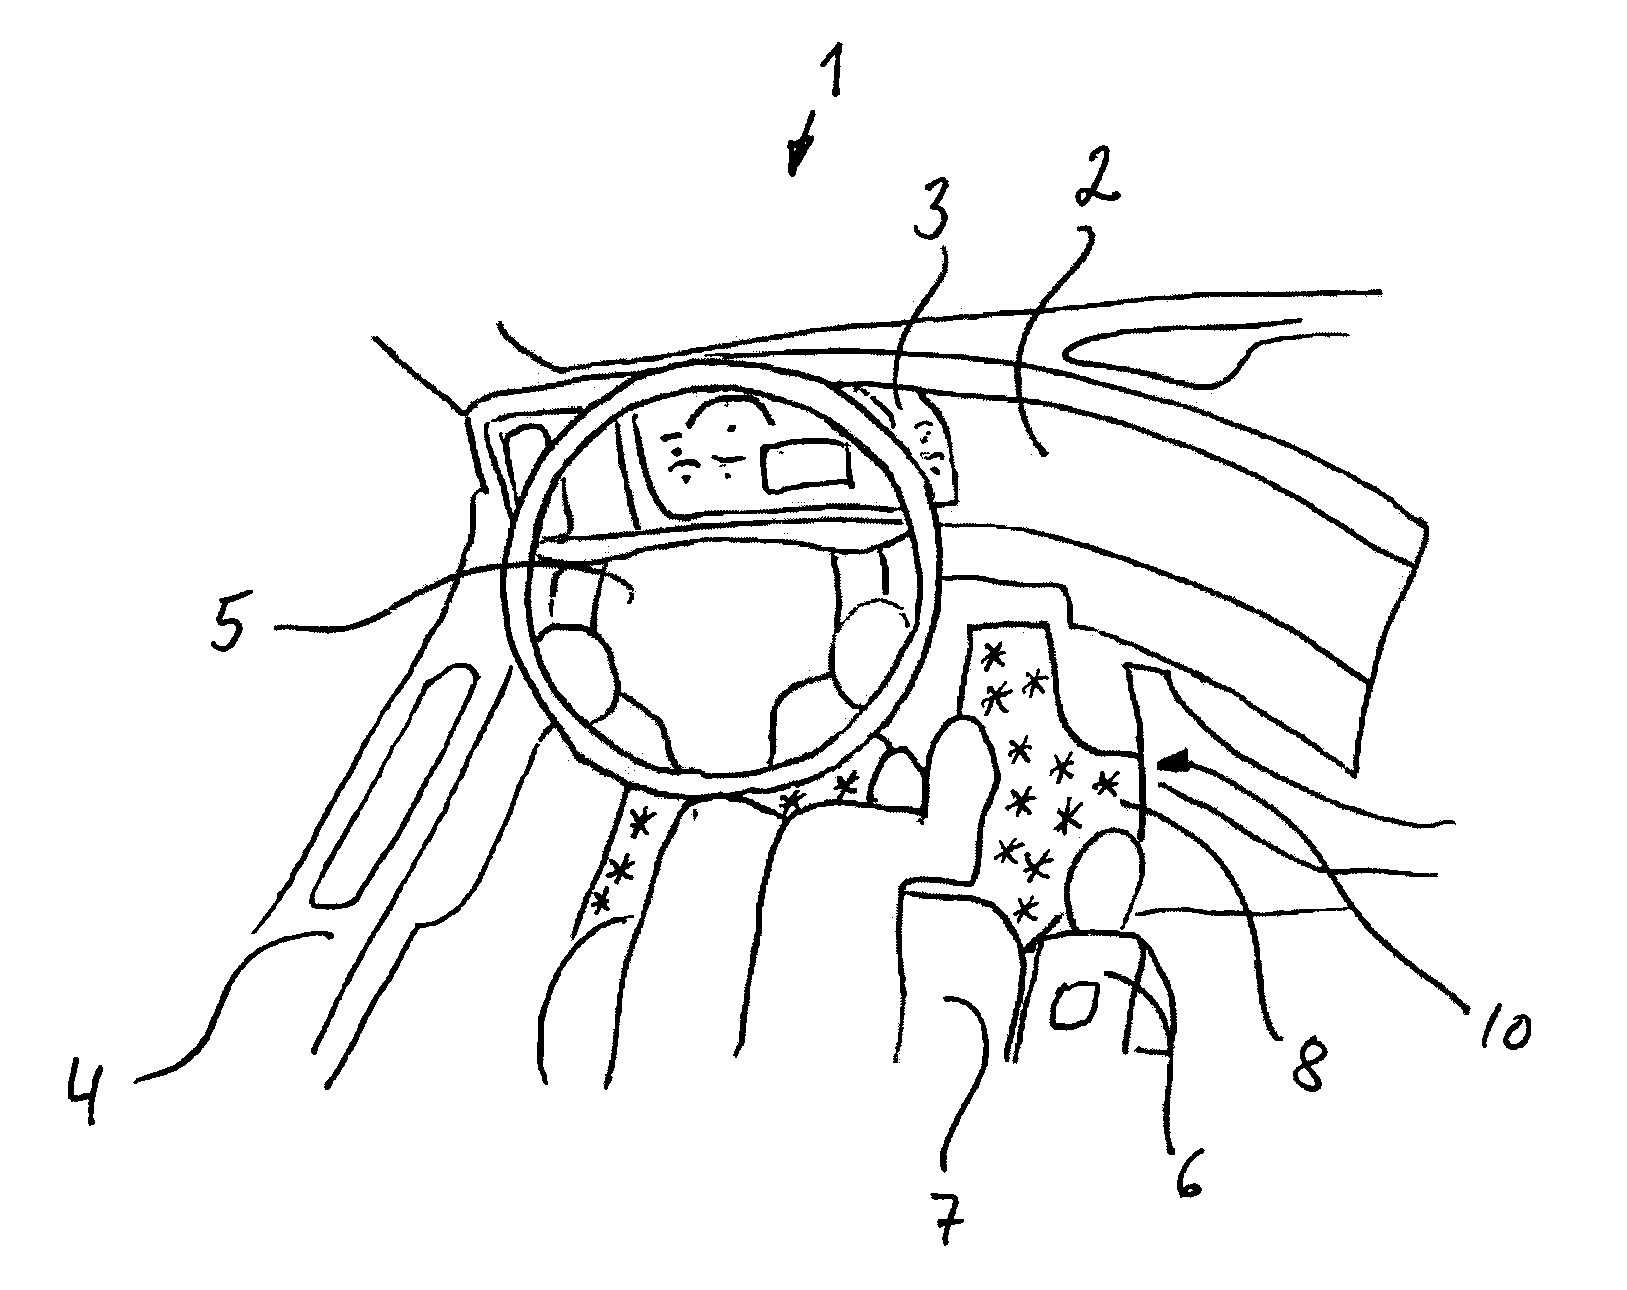 An arrangement for displaying information in a vehicle